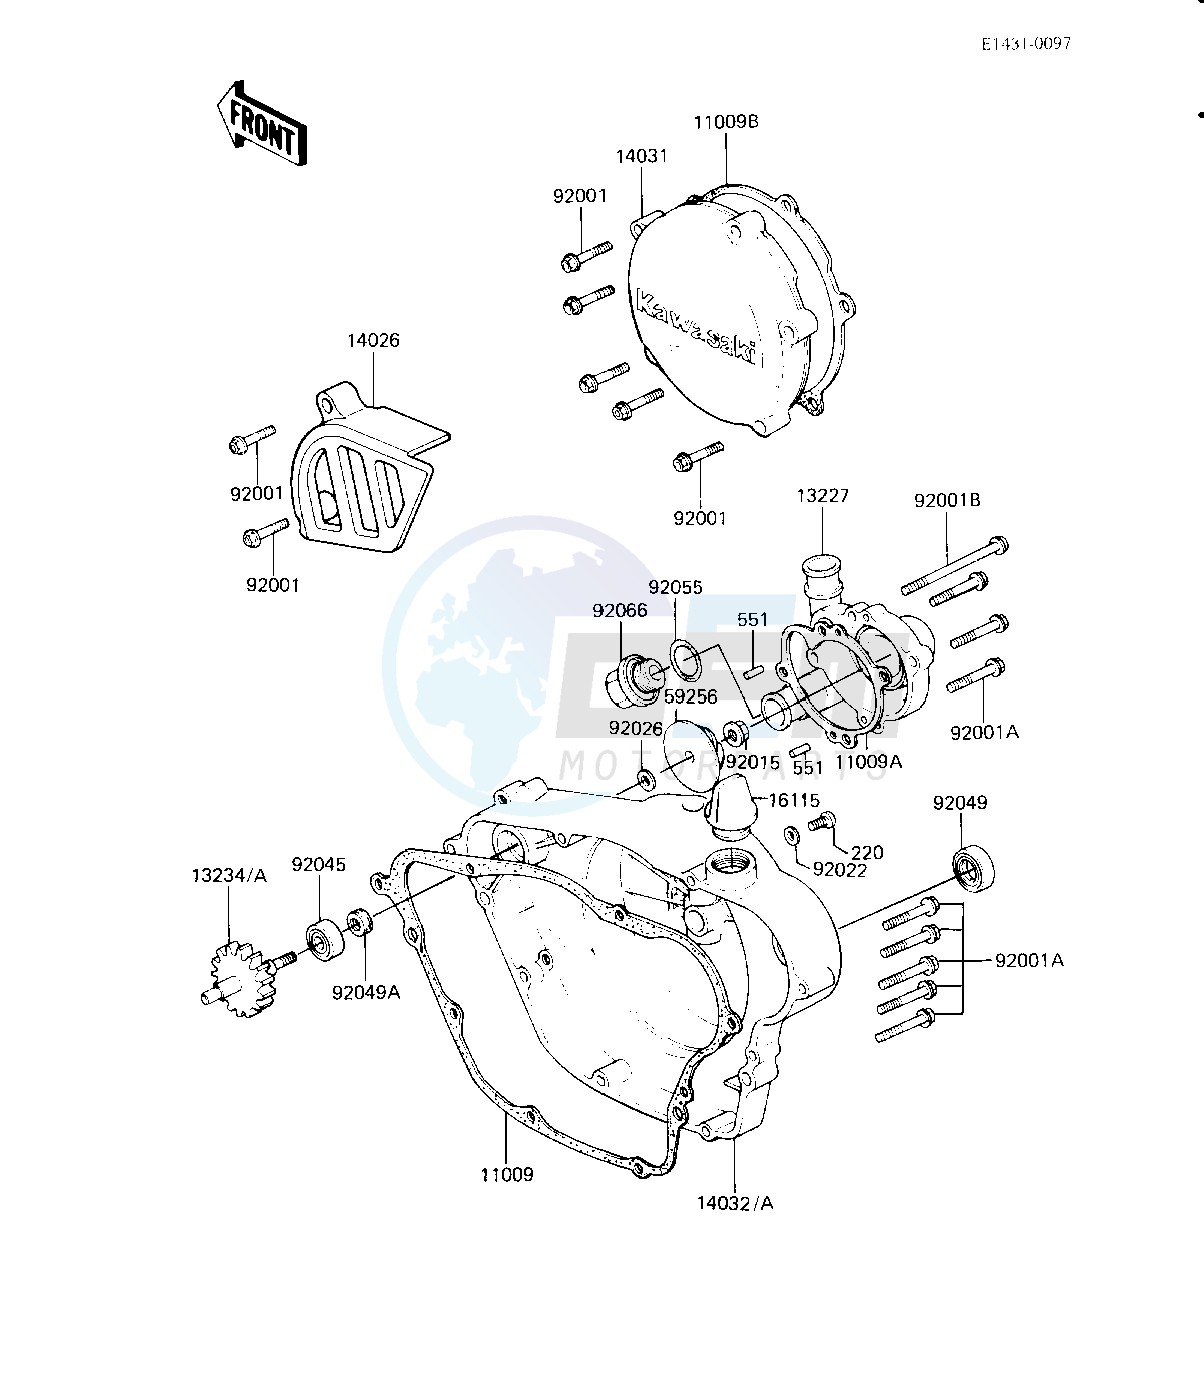 ENGINE COVERS_WATER PUMP blueprint